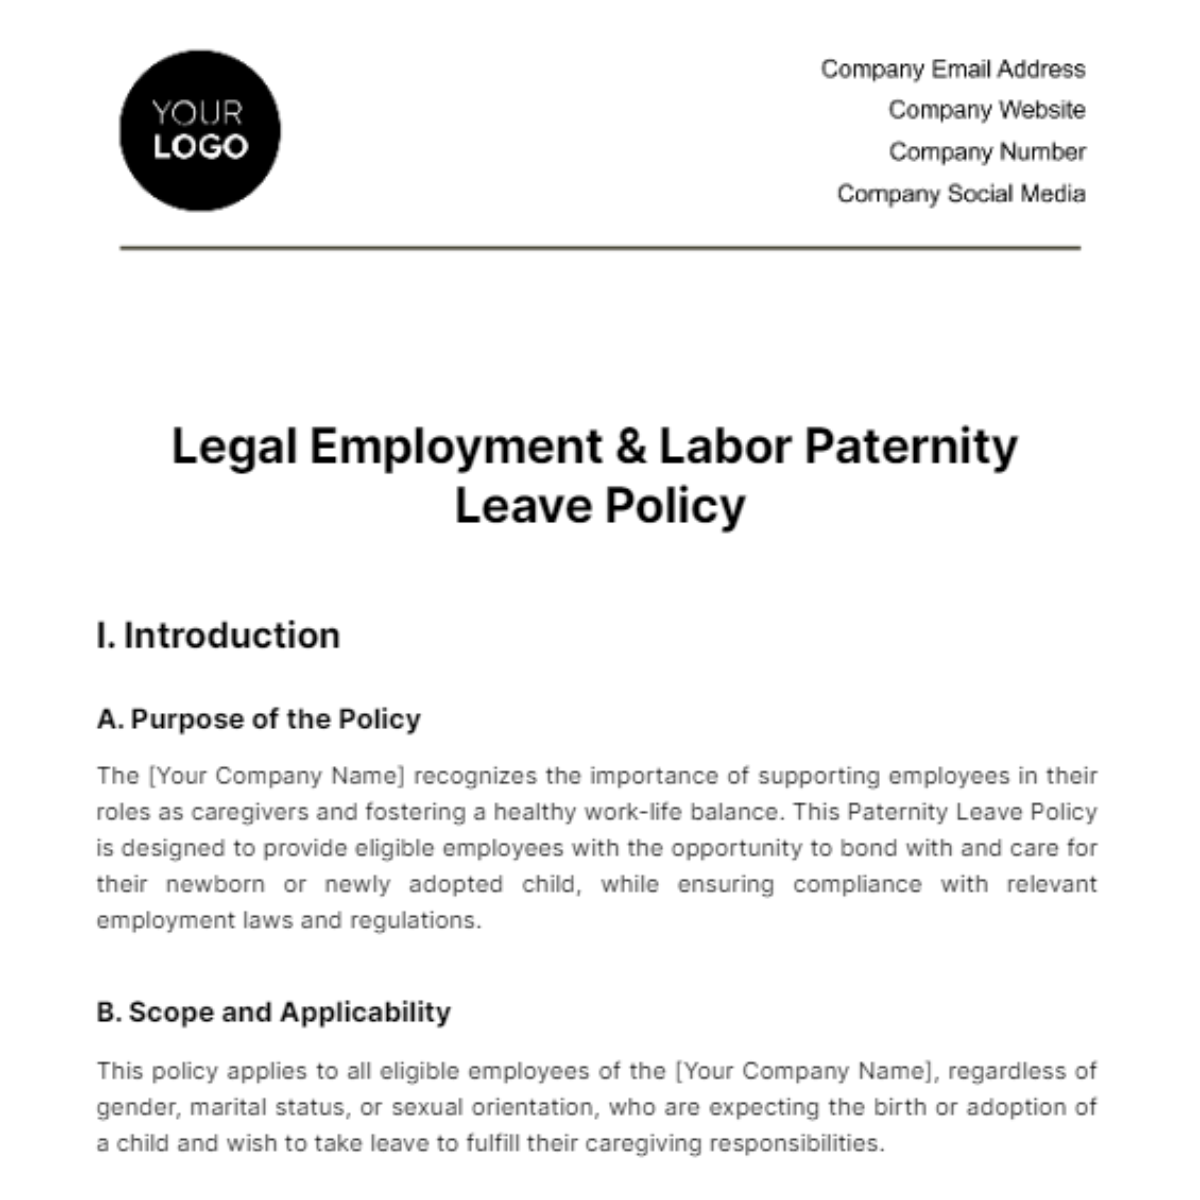 Free Legal Employment & Labor Paternity Leave Policy Template